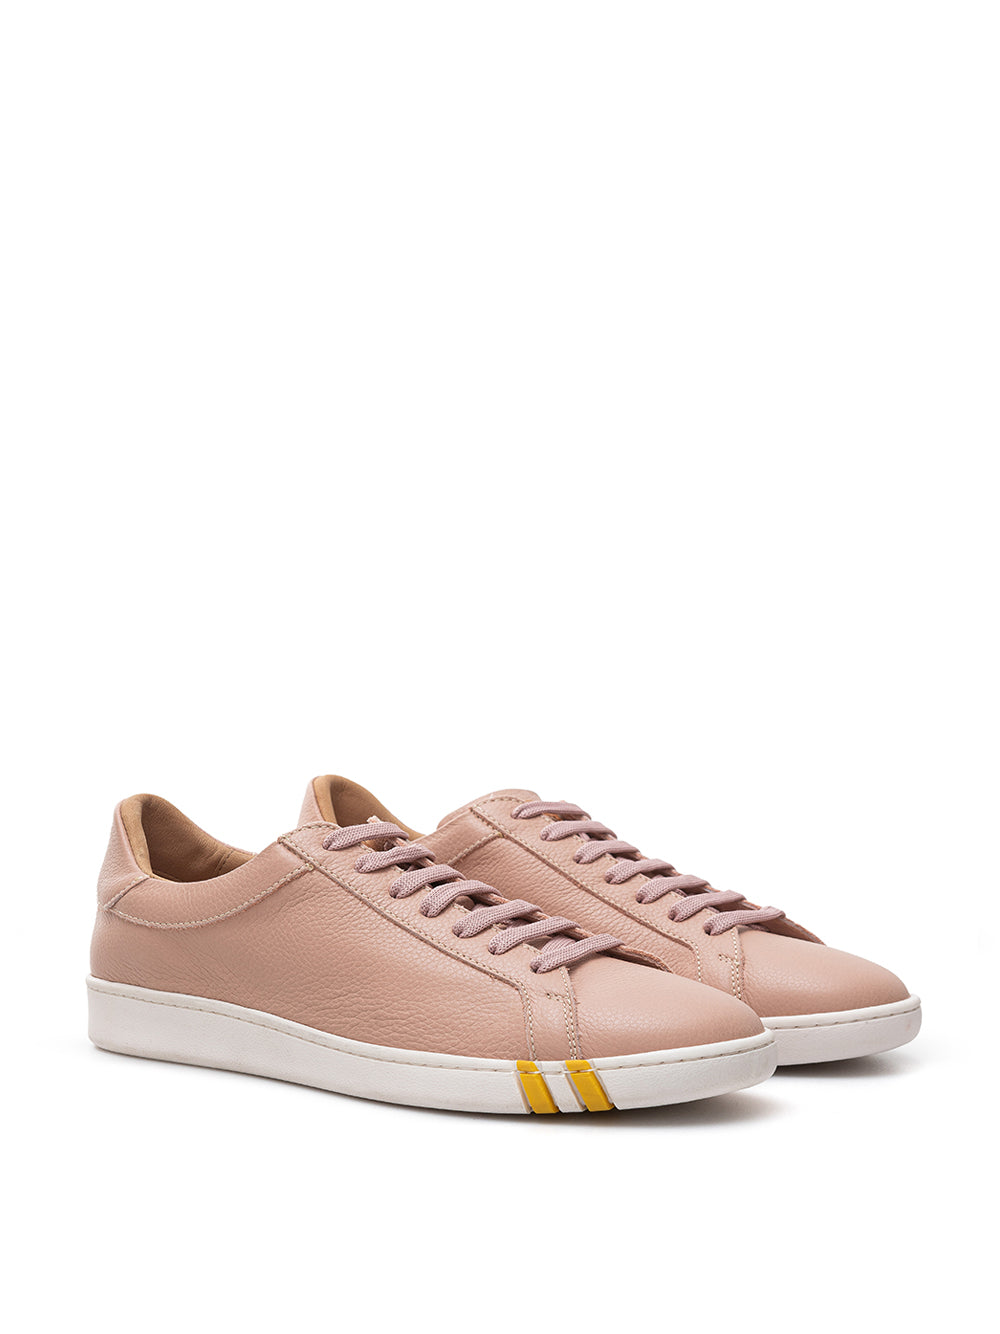 Bally Chic Pink Leather Lace-Up Sneakers